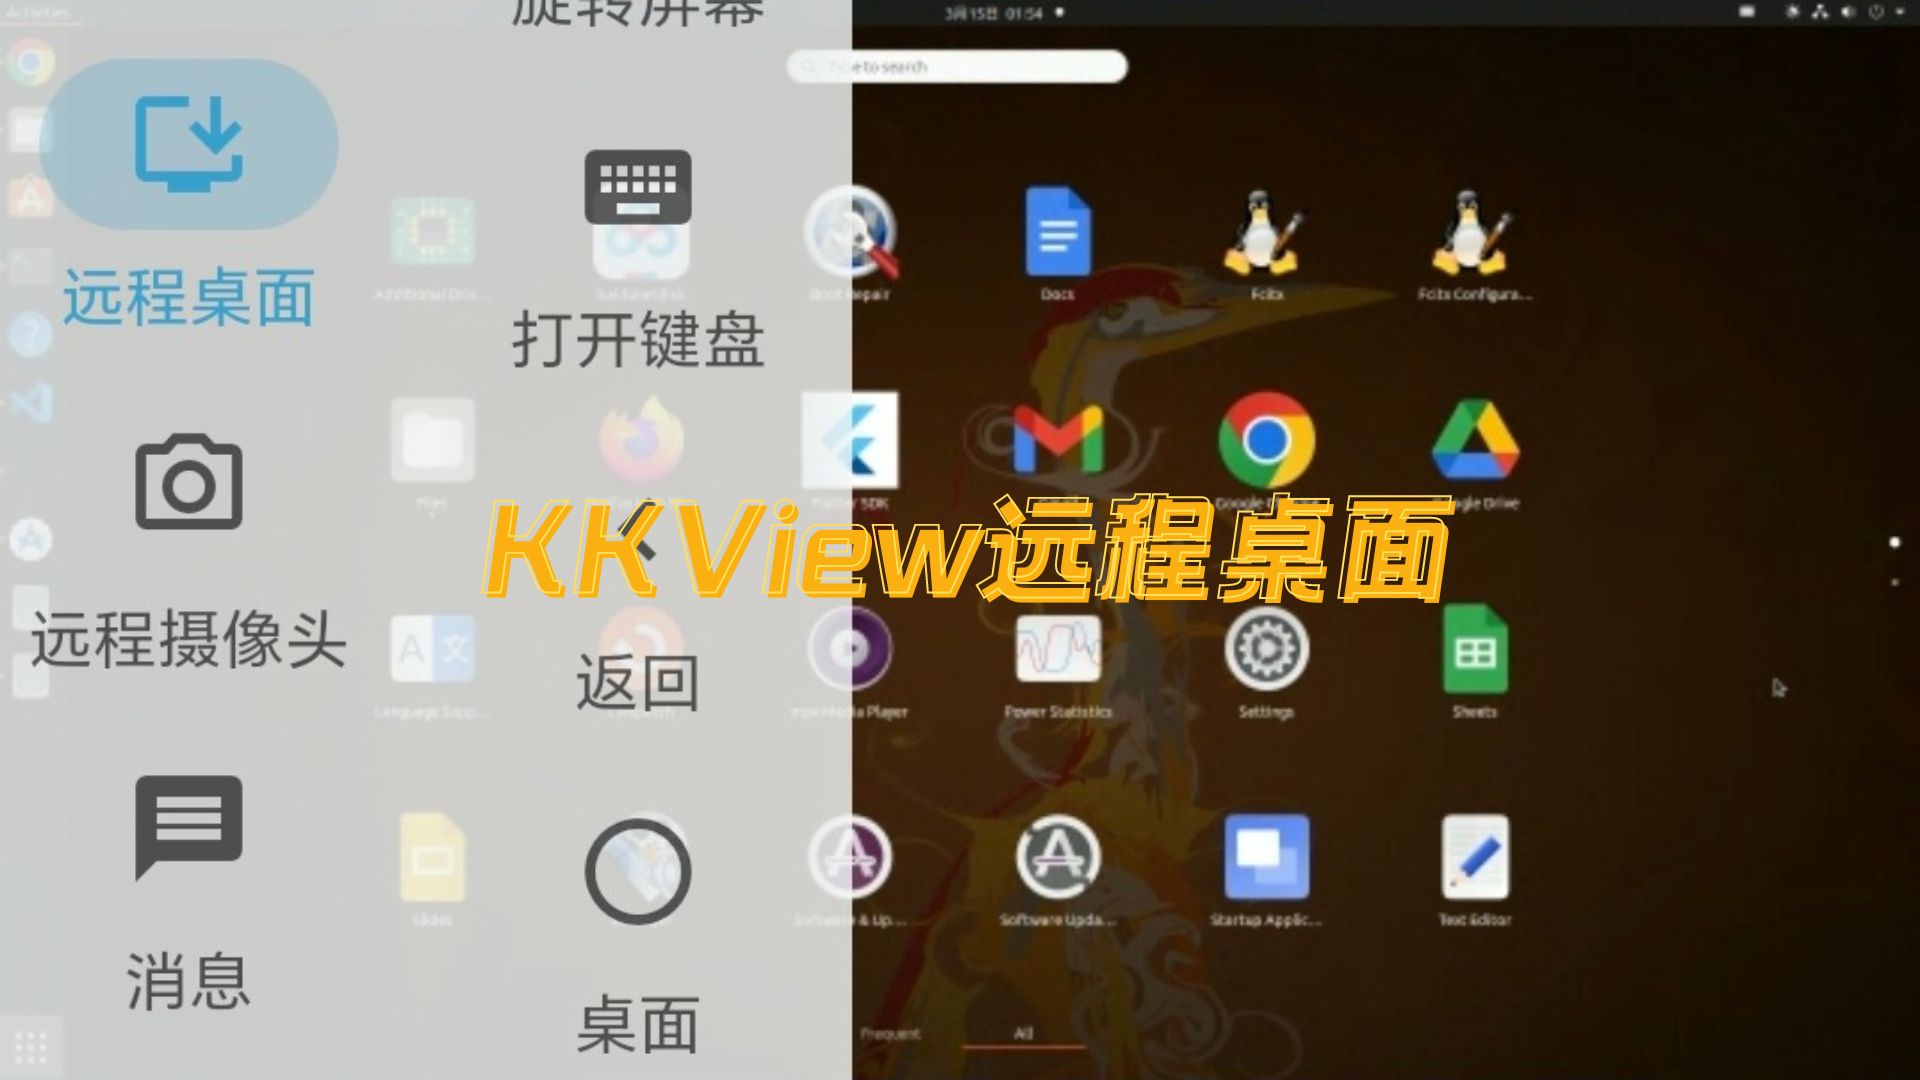 KKVIEW<span style='color:red;'>远程</span><span style='color:red;'>控制</span> 手机<span style='color:red;'>远程</span><span style='color:red;'>控制</span><span style='color:red;'>电脑</span>